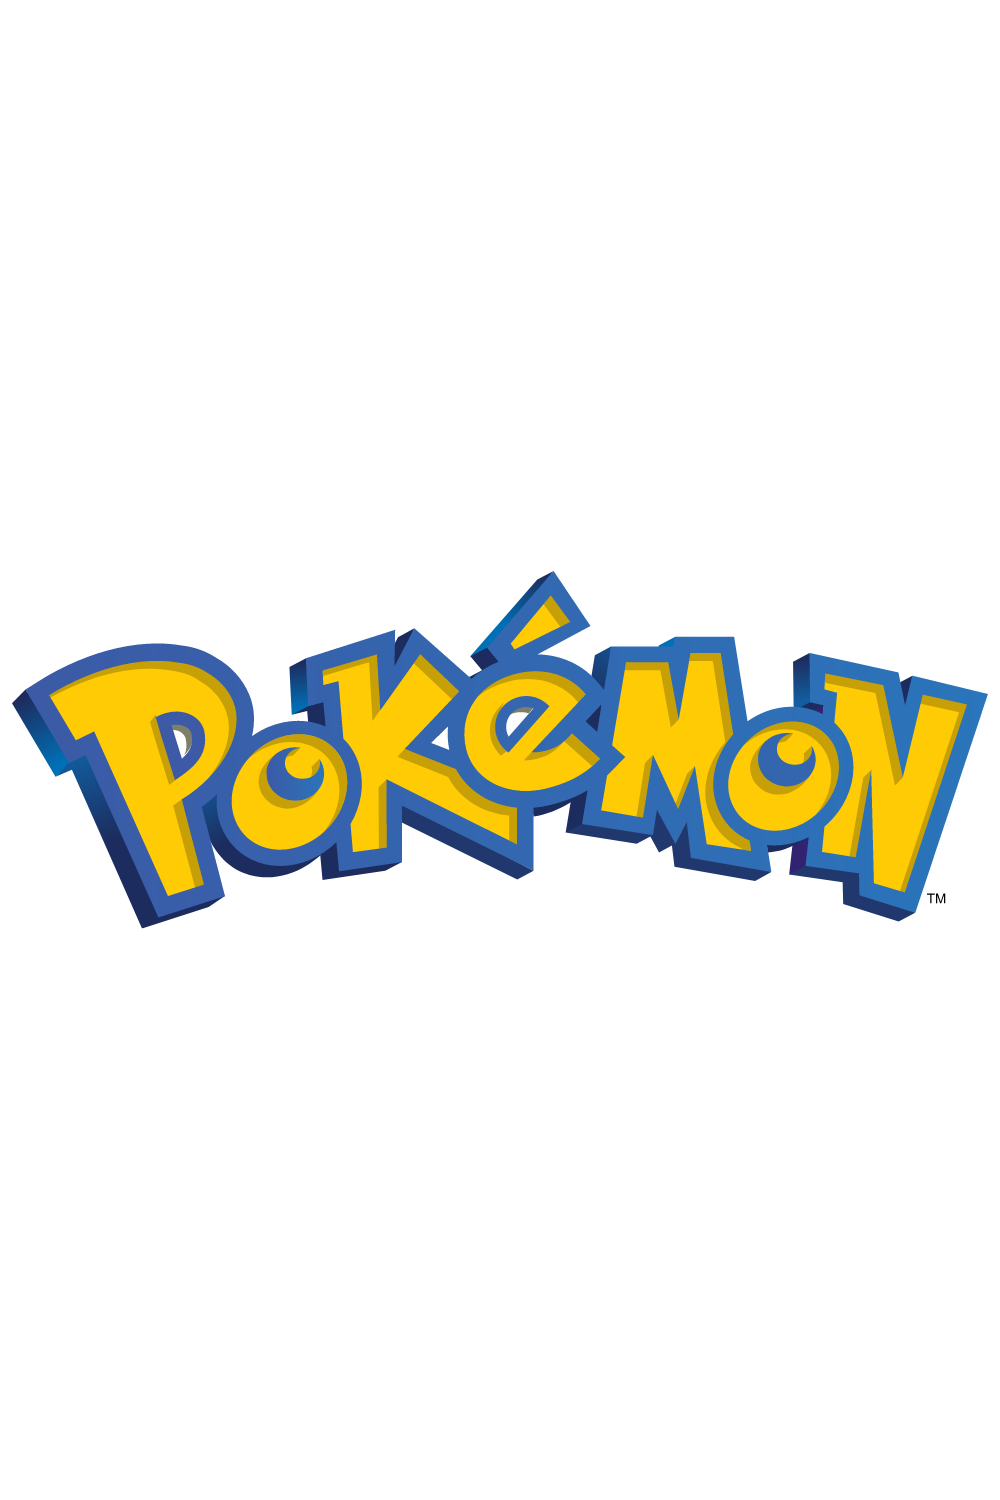 Read more about the article Pokémon